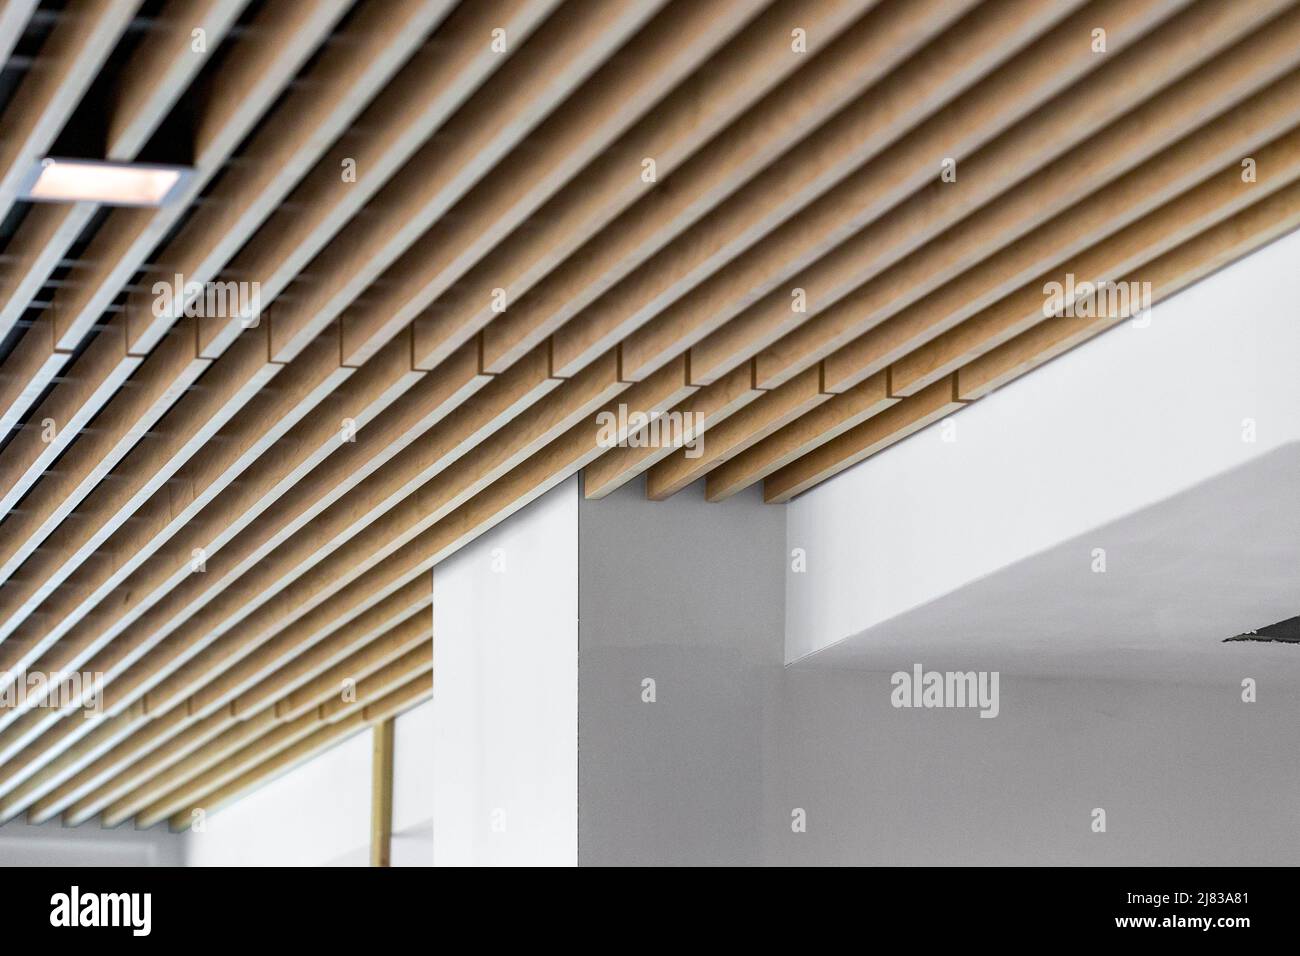 installed overhead sound absorbing wooden planks for visual decoration and noise reduction in a newly constructed commercial building Stock Photo